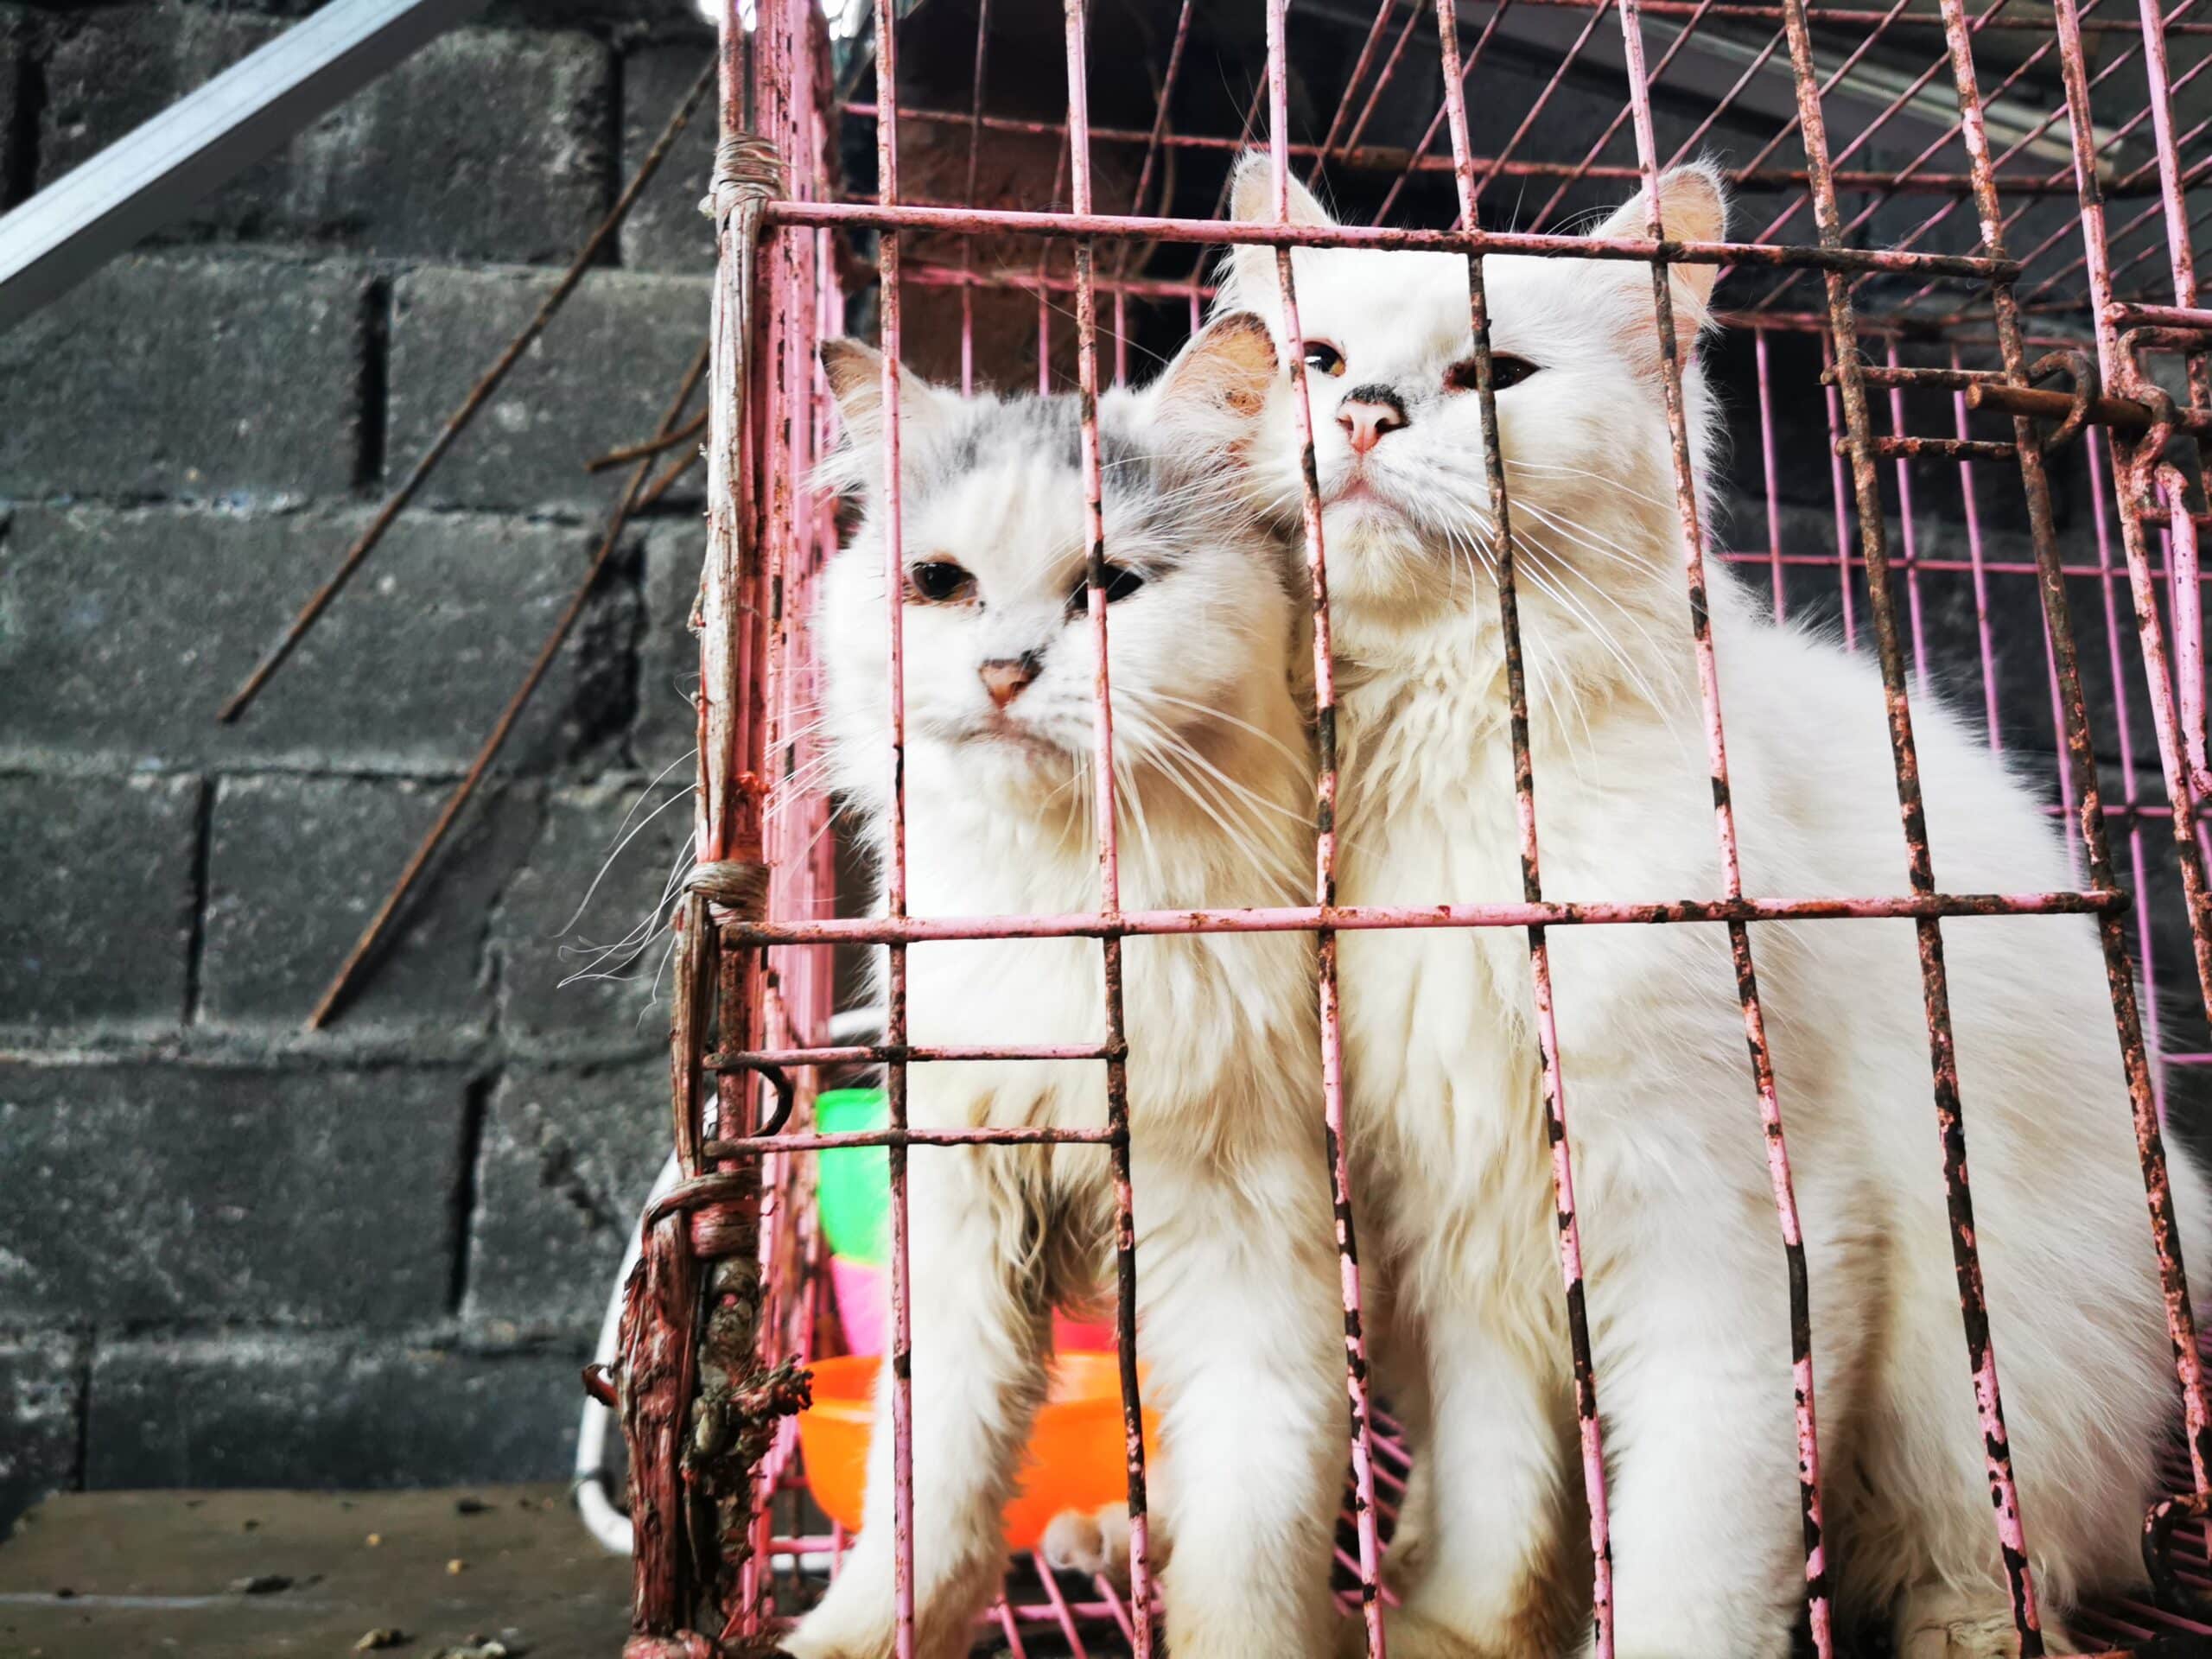 Tomohon ‘Extreme’ Market bans slaughter and sale of dogs and cats for meat